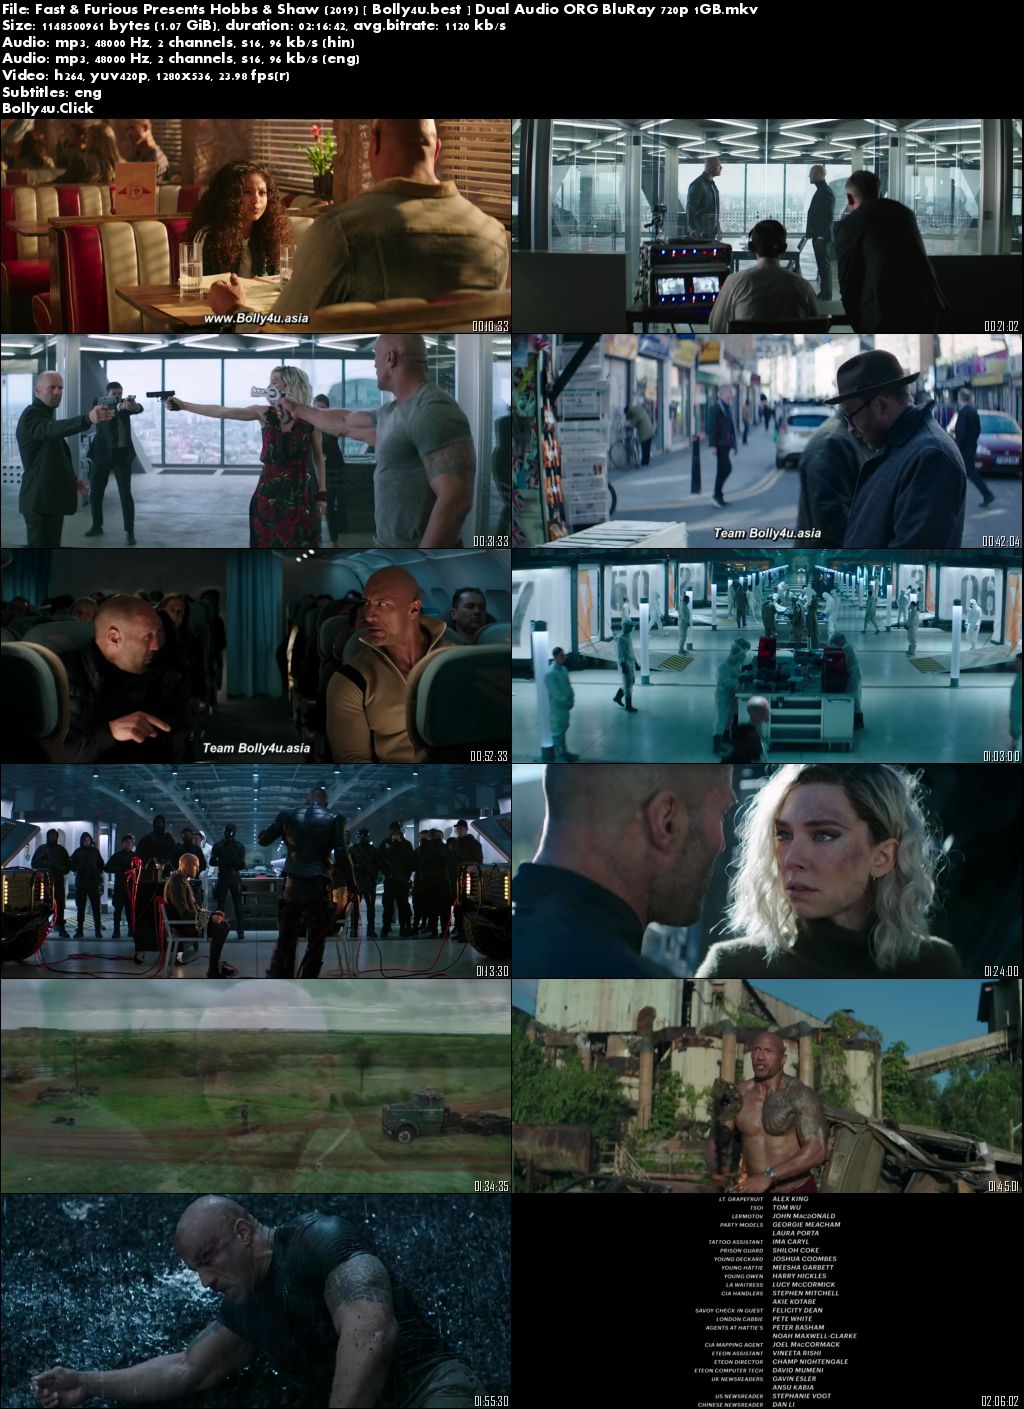 Fast And Furious Presents Hobbs And Shaw 2019 BRRip 500MB Hindi Dual Audio ORG 480p Download